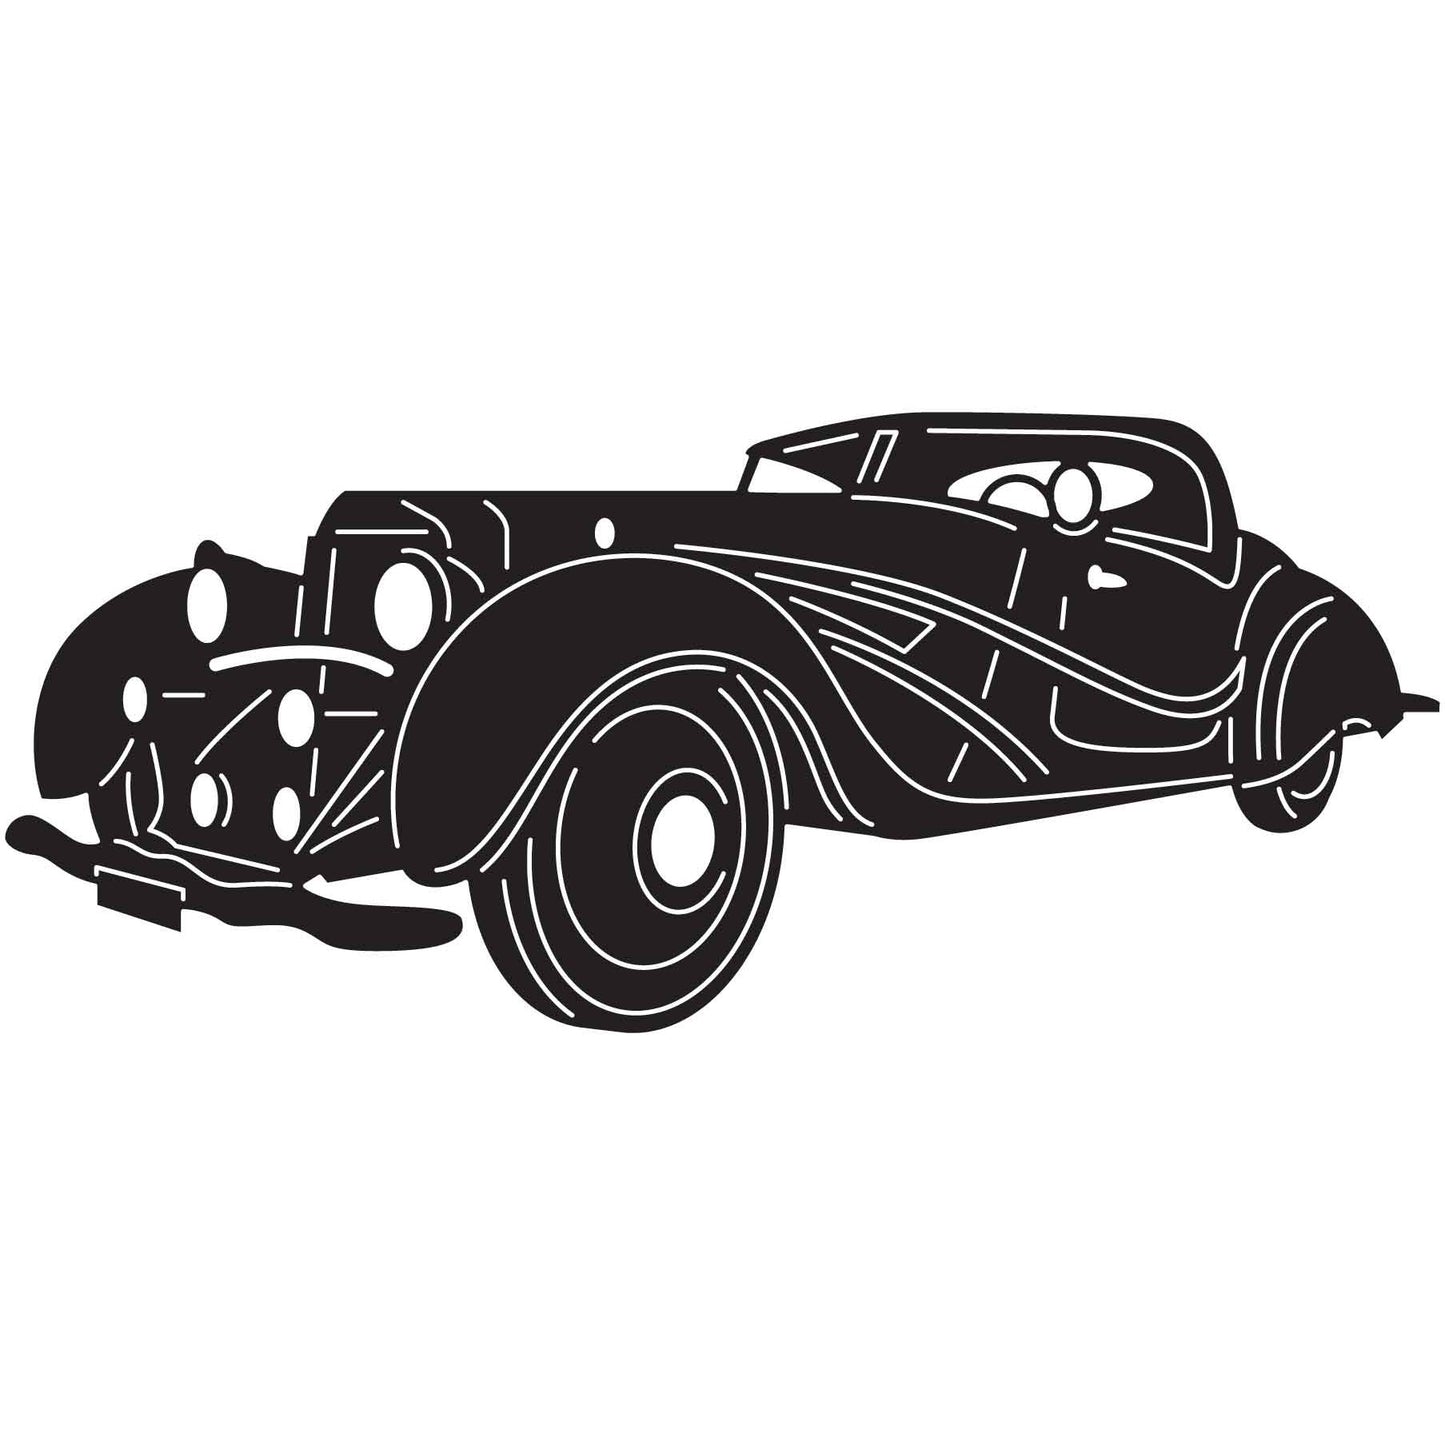 Vintage Old Cars 062 DXF File Cut Ready for CNC